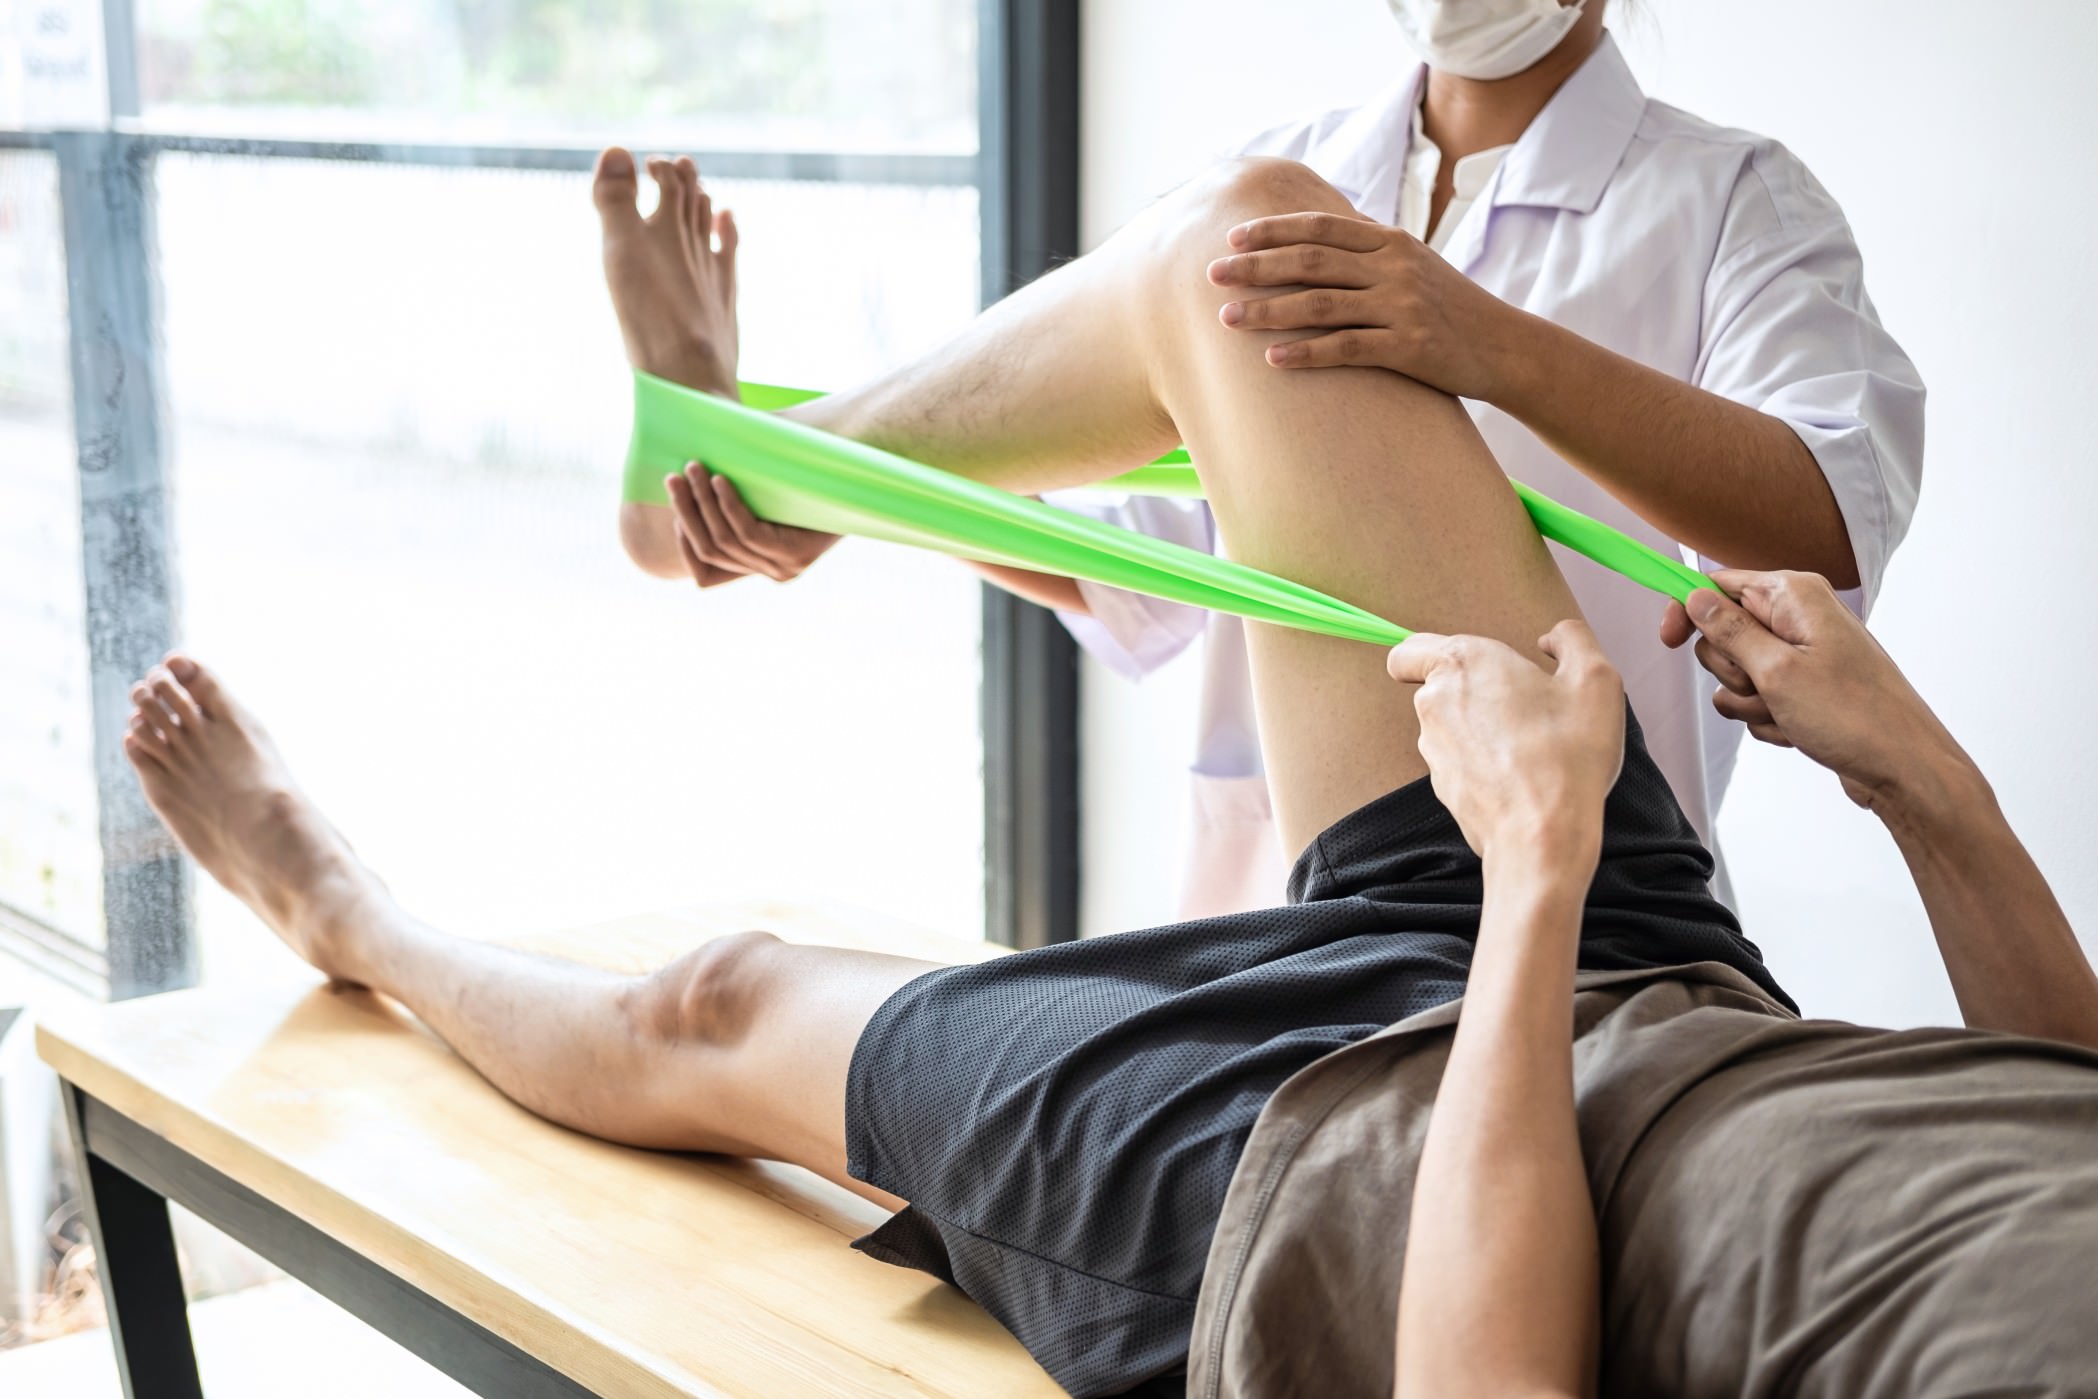 Physiotherapist working examining treating injured leg of athlete male patient, Doing the Rehabilitation therapy pain in clinic